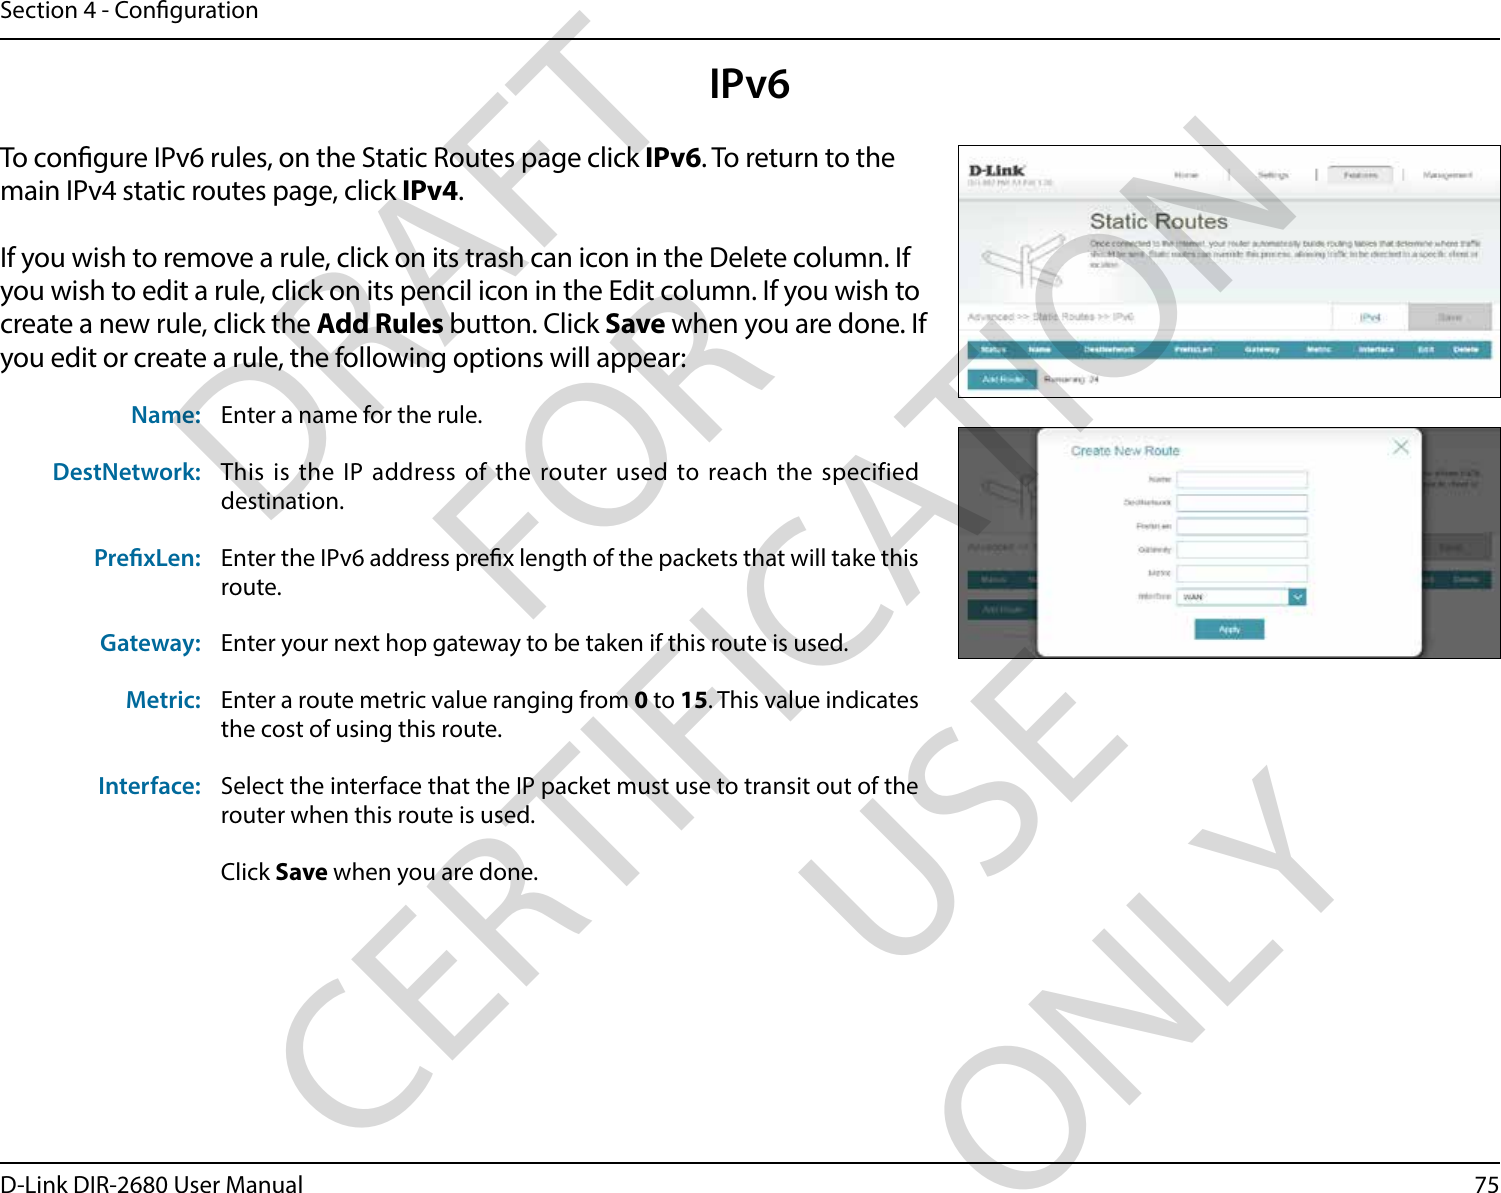 75D-Link DIR-2680 User ManualSection 4 - CongurationIPv6To congure IPv6 rules, on the Static Routes page click IPv6. To return to the main IPv4 static routes page, click IPv4.If you wish to remove a rule, click on its trash can icon in the Delete column. If you wish to edit a rule, click on its pencil icon in the Edit column. If you wish to create a new rule, click the Add Rules button. Click Save when you are done. If you edit or create a rule, the following options will appear:Name: Enter a name for the rule.DestNetwork: This is the IP address of the router used to reach the specified destination.PrexLen: Enter the IPv6 address prex length of the packets that will take this route. Gateway: Enter your next hop gateway to be taken if this route is used.Metric: Enter a route metric value ranging from 0 to 15. This value indicates the cost of using this route. Interface: Select the interface that the IP packet must use to transit out of the router when this route is used.Click Save when you are done.DRAFT FOR CERTIFICATION USE ONLY